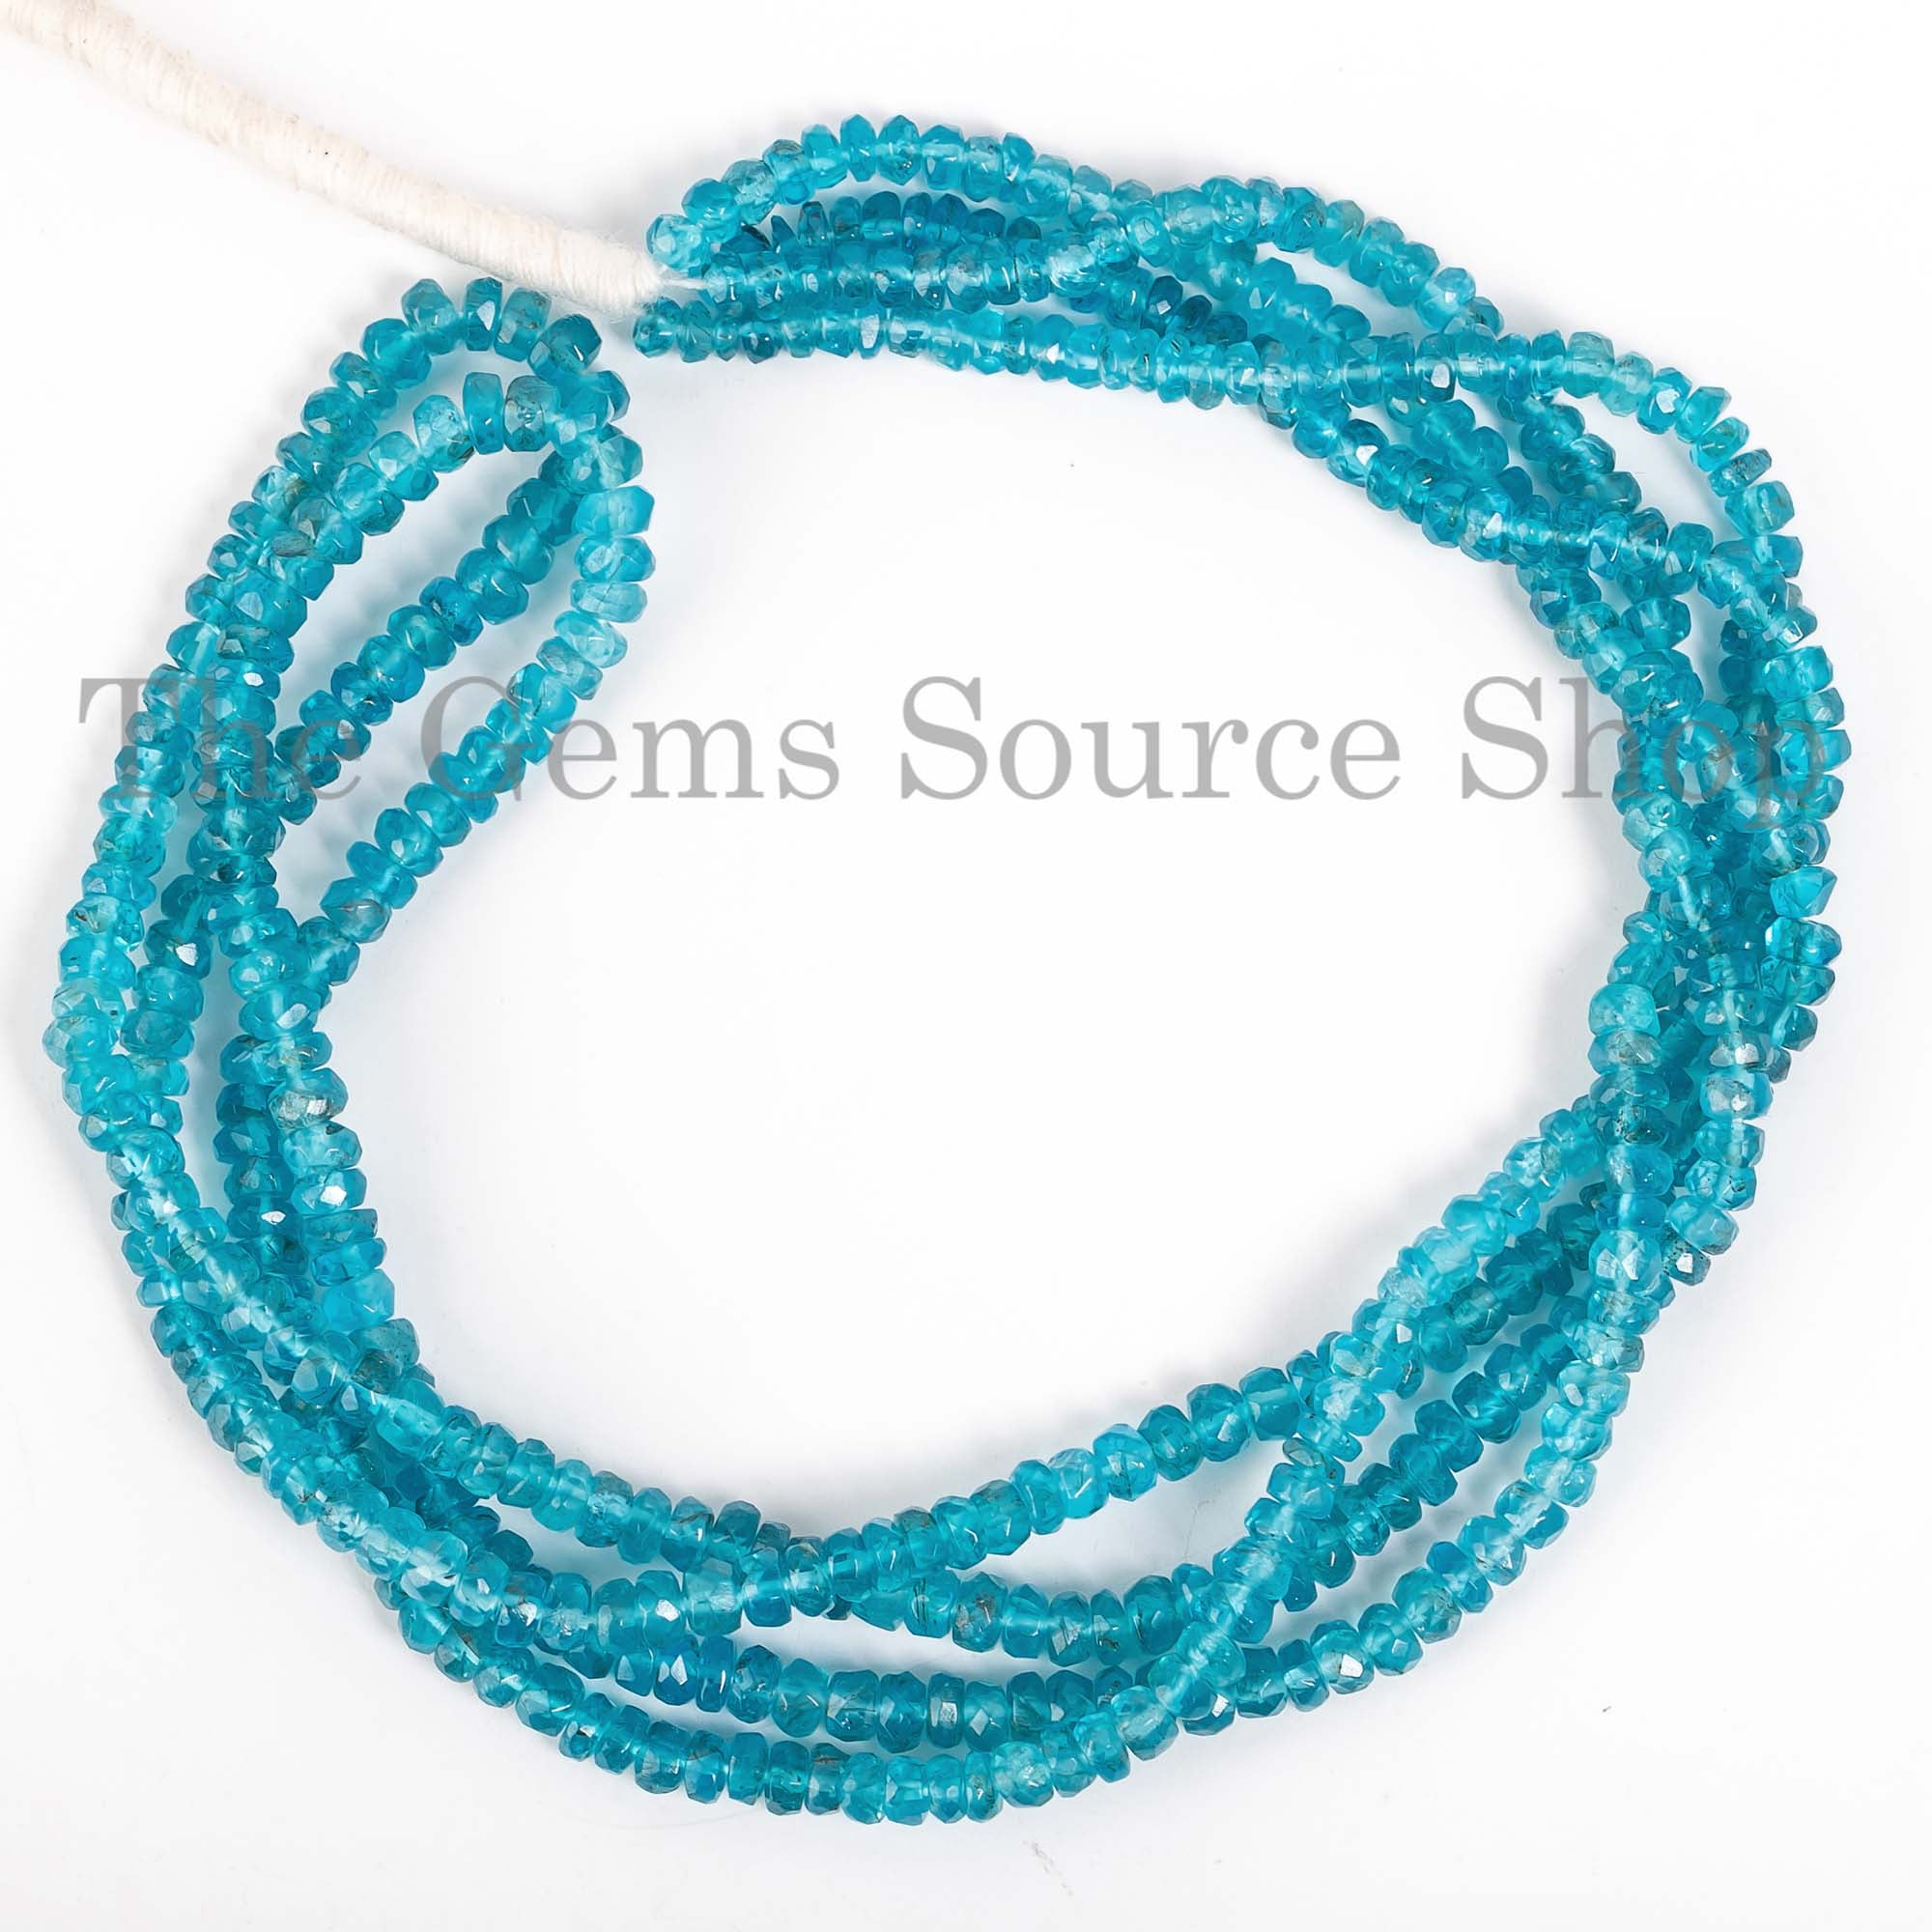 Neon Apatite Beads, Apatite Faceted Beads, Apatite Rondelle Shape Beads, Apatite Gemstone Beads